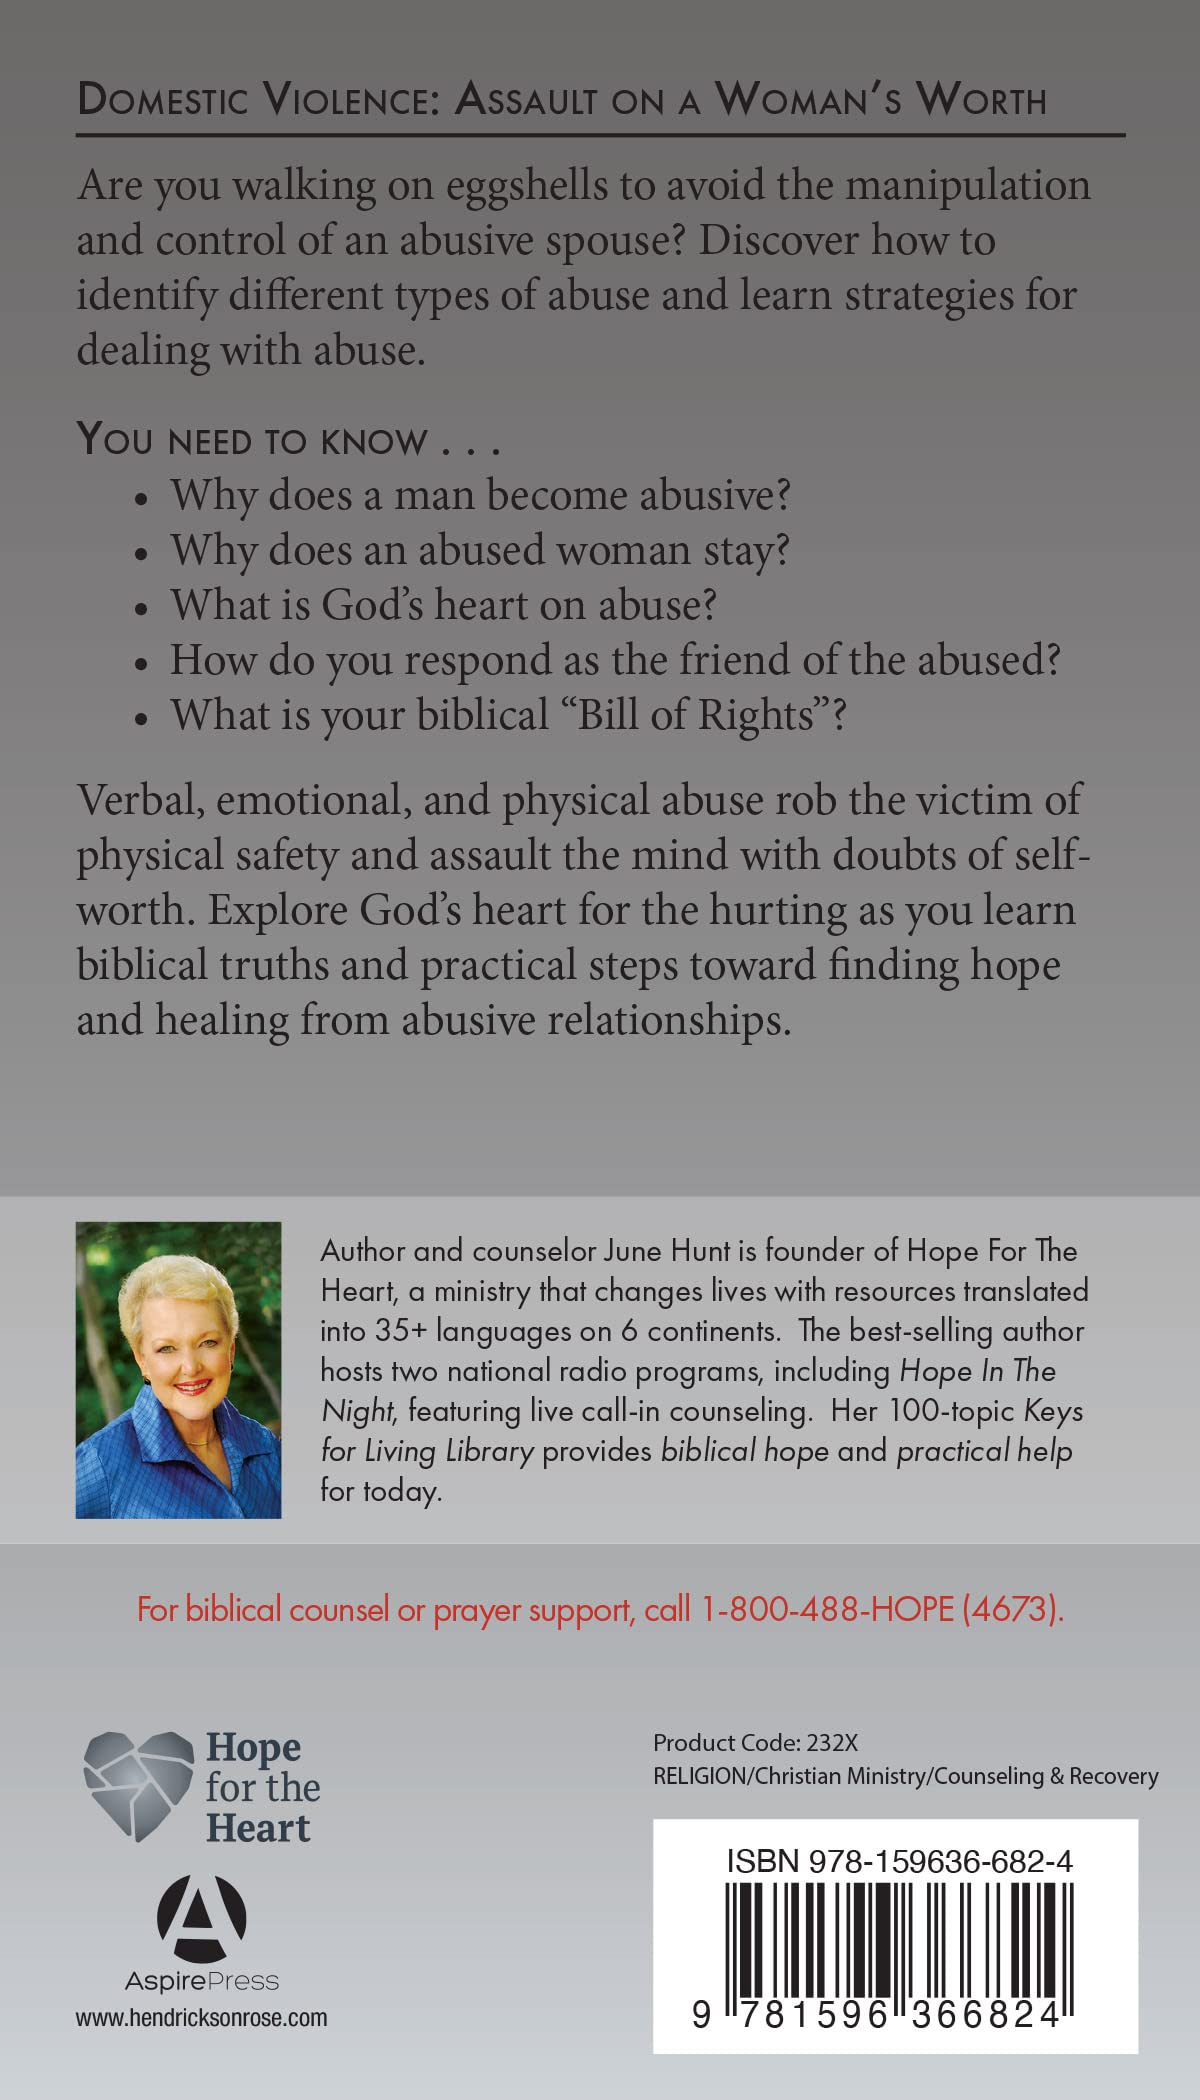 Domestic Violence: Assault on a Woman's Worth (Hope for the Heart)